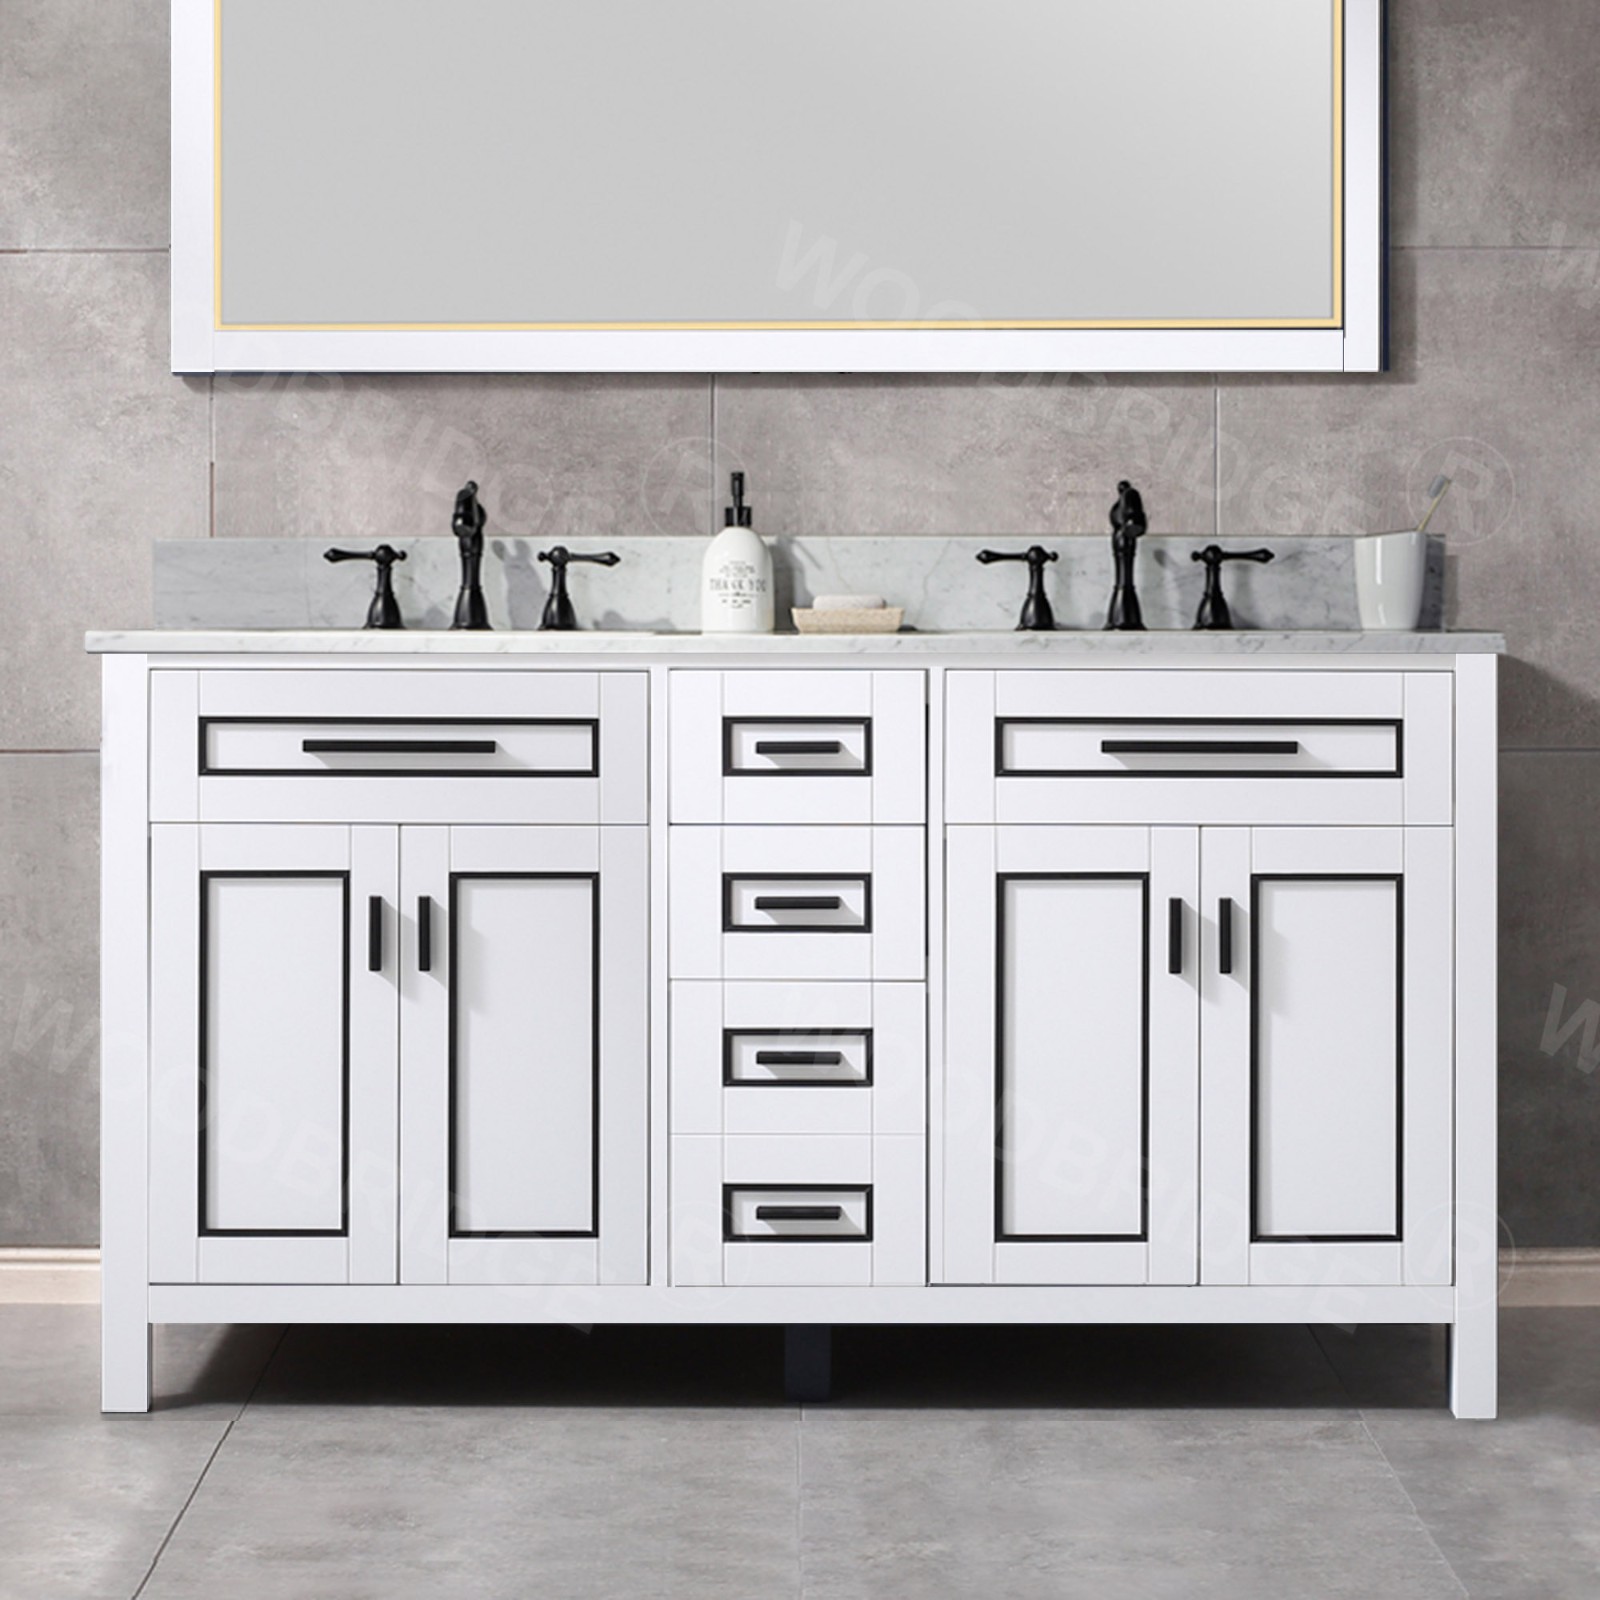  WOODBRIDGE Milan  61” Floor Mounted Single Basin Vanity Set with Solid Wood Cabinet in White, and Carrara White Marble Vanity Top with Pre-installed Undermount Rectangle Bathroom Sink in White, Pre-Drilled 3-Hole for 8-inch Widespread Faucet_4610